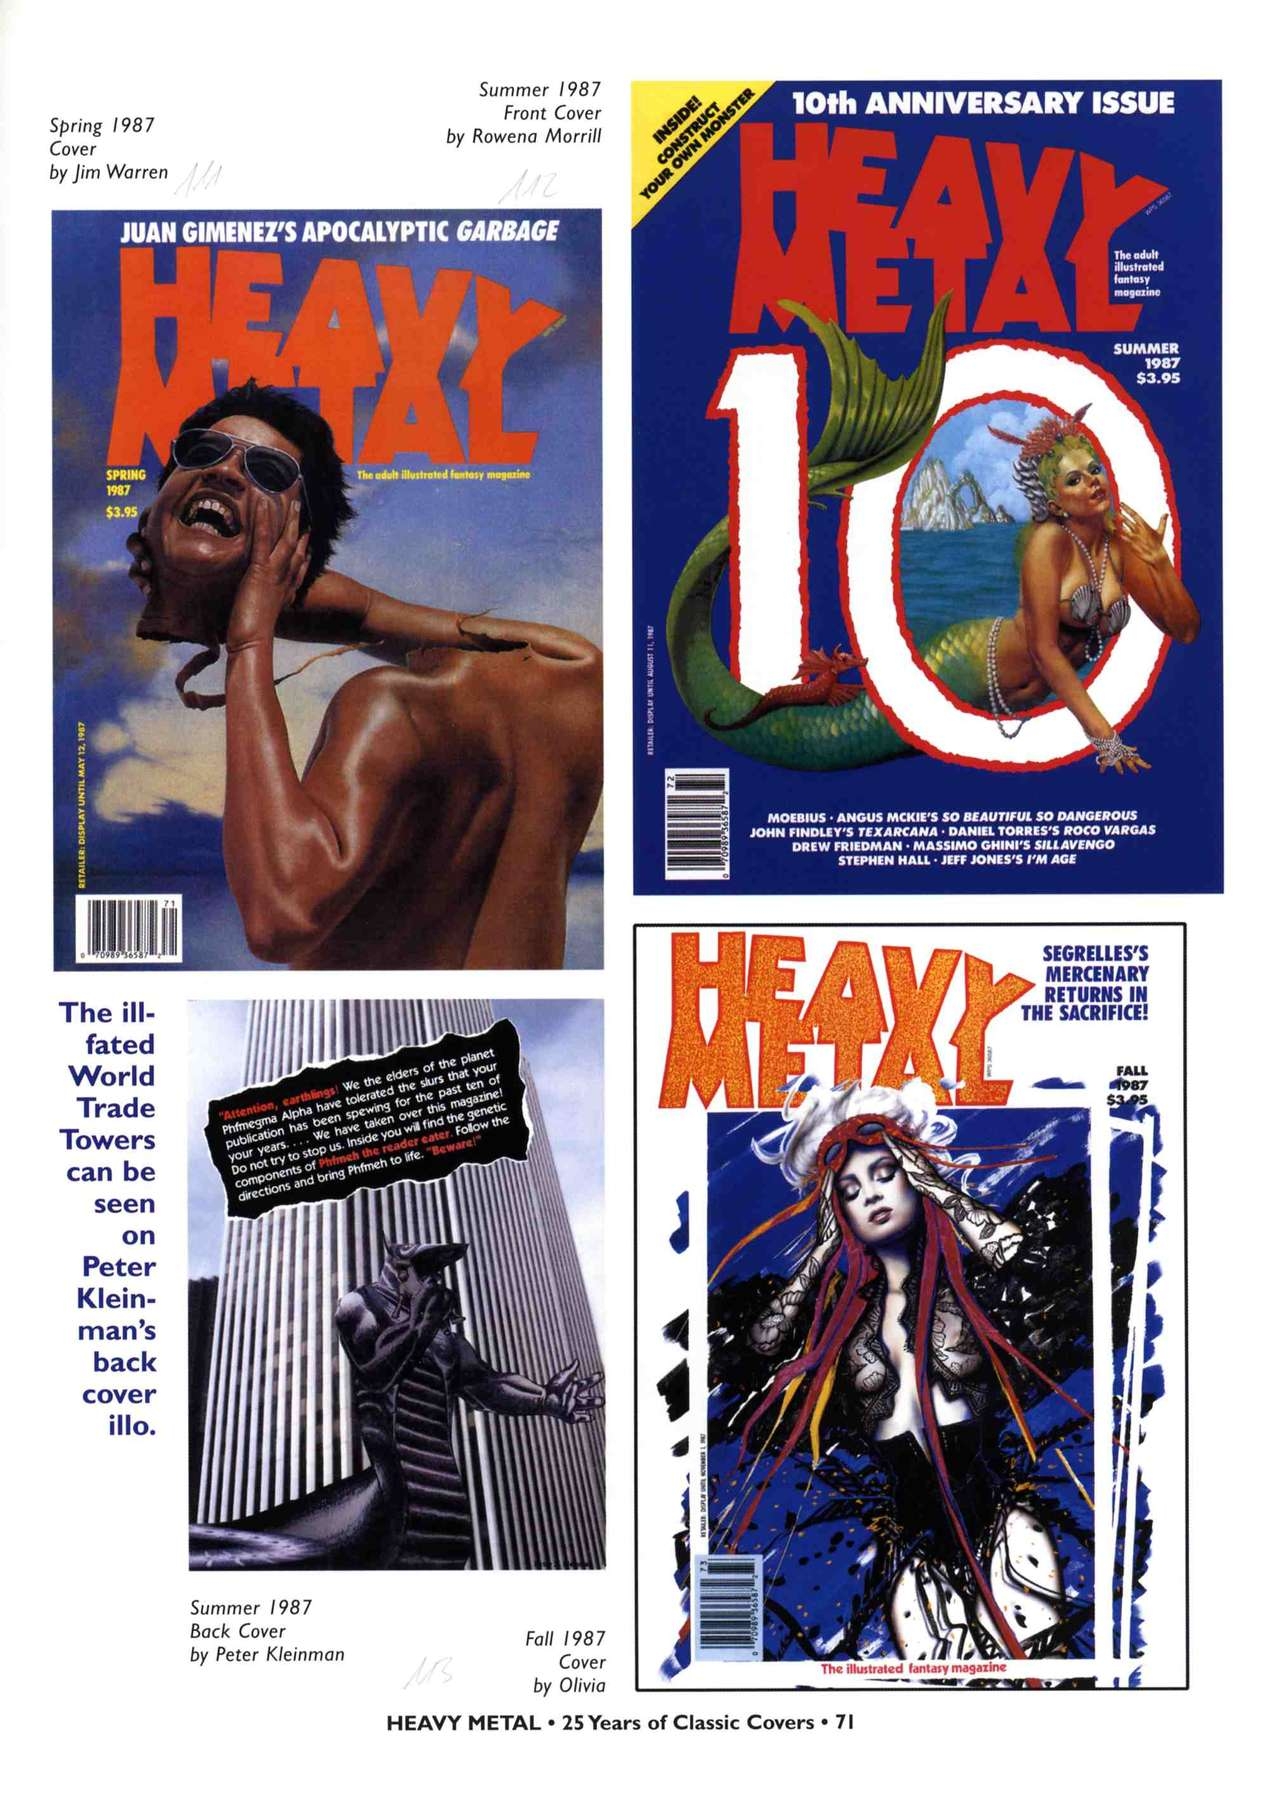 HEAVY METAL 25 Years of Classic Covers 76